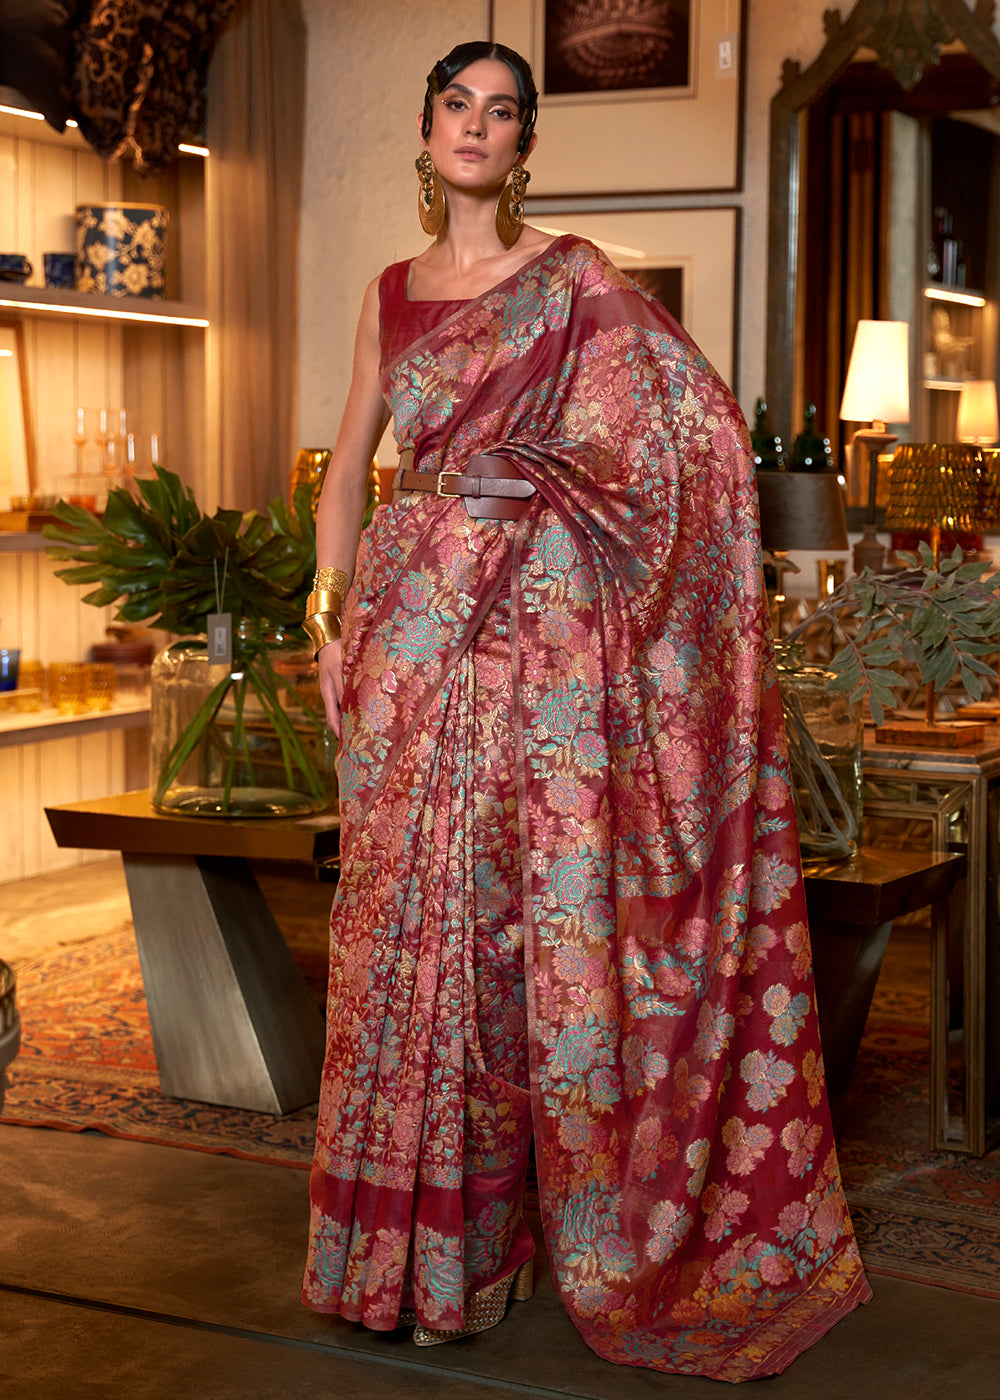 Shop Now Earth Red Floral Kashmiri Weaving Silk Wedding Party Saree from Empress Clothing in USA, UK, Canada & Worldwide. 